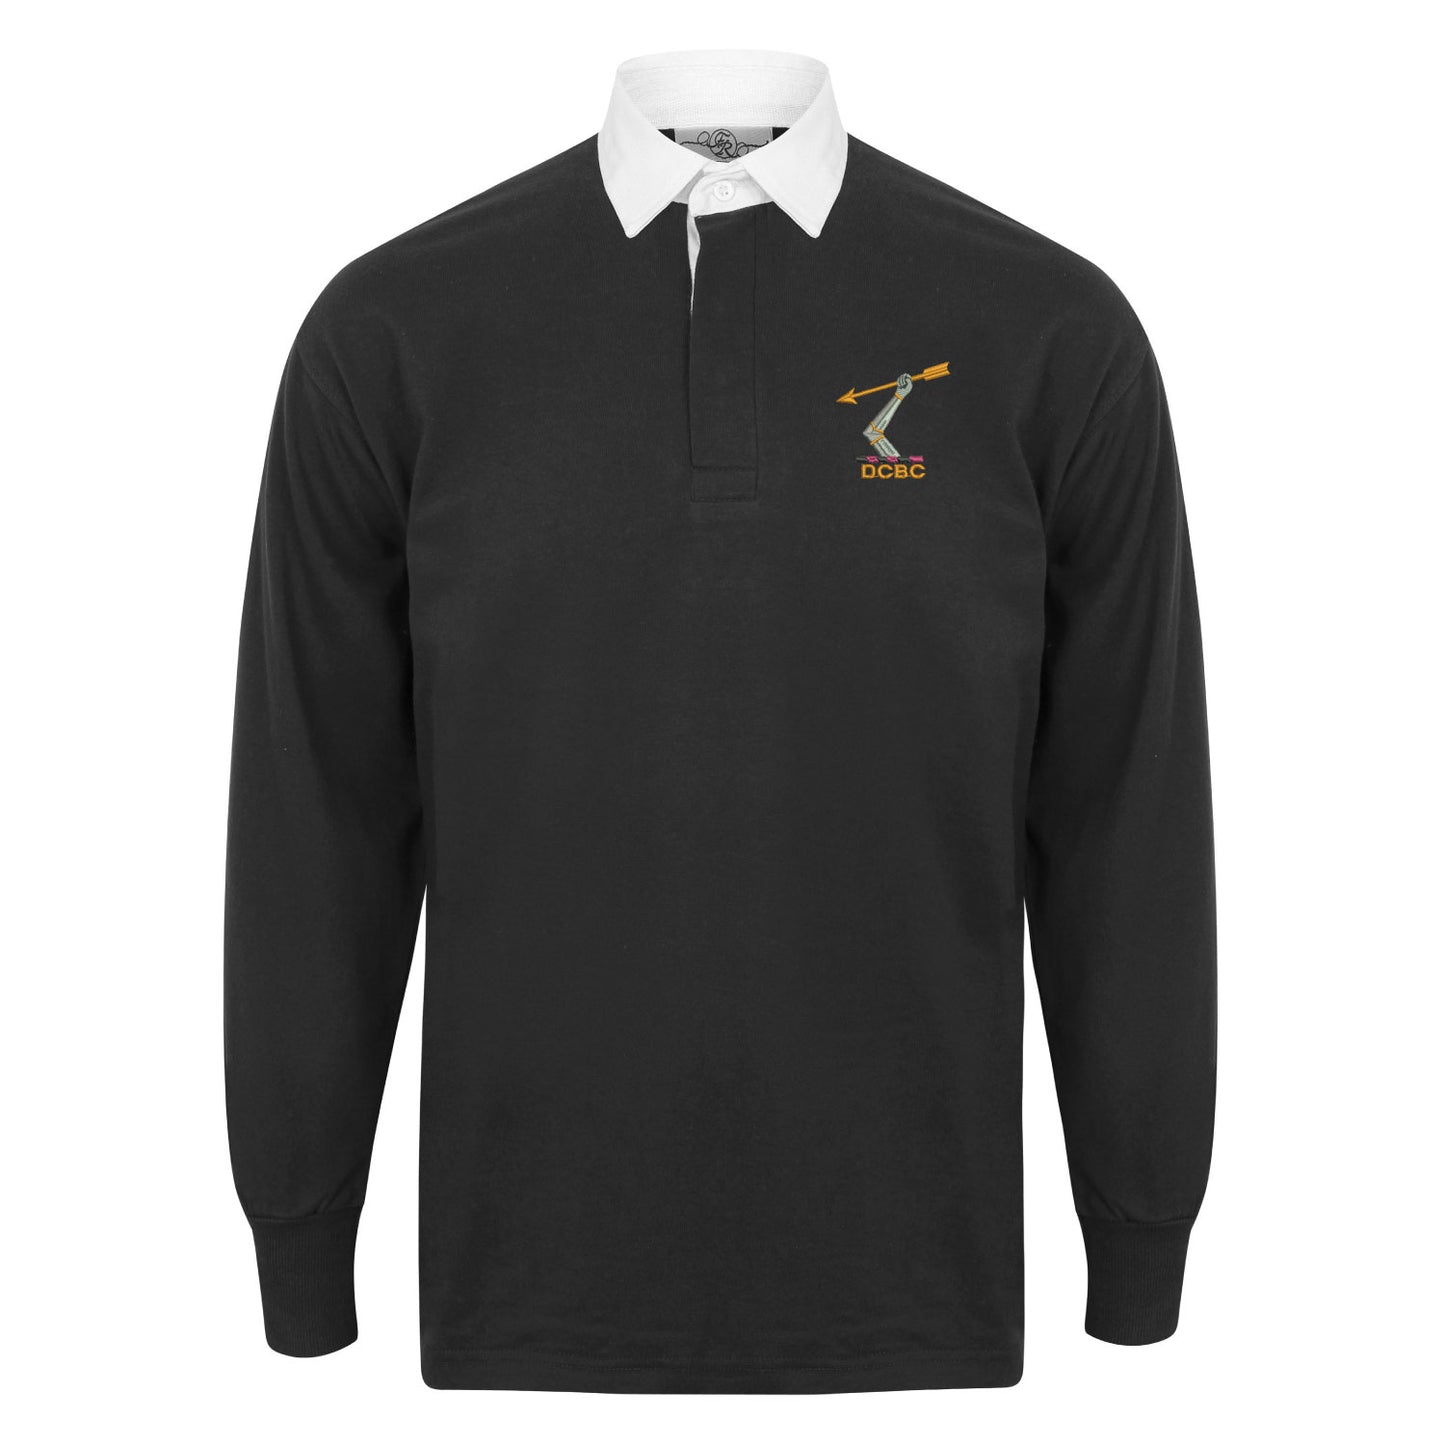 Downing College Leisure Rugby Shirt